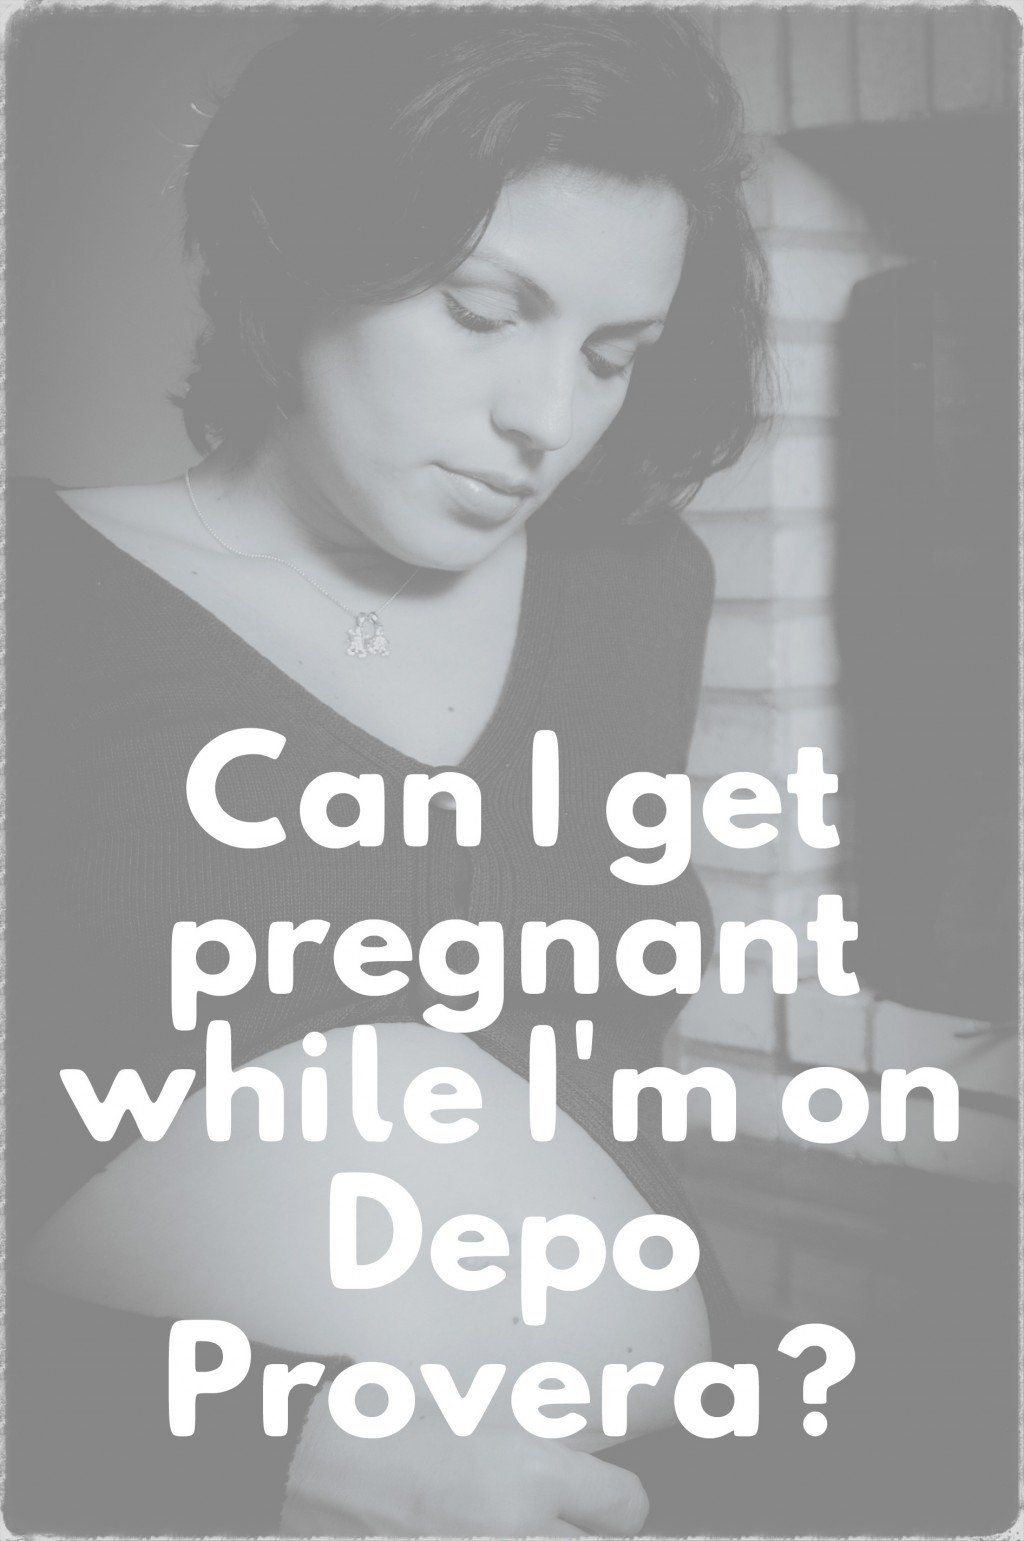 Getting Pregnant After Depo Provera Shots | Wehavekids